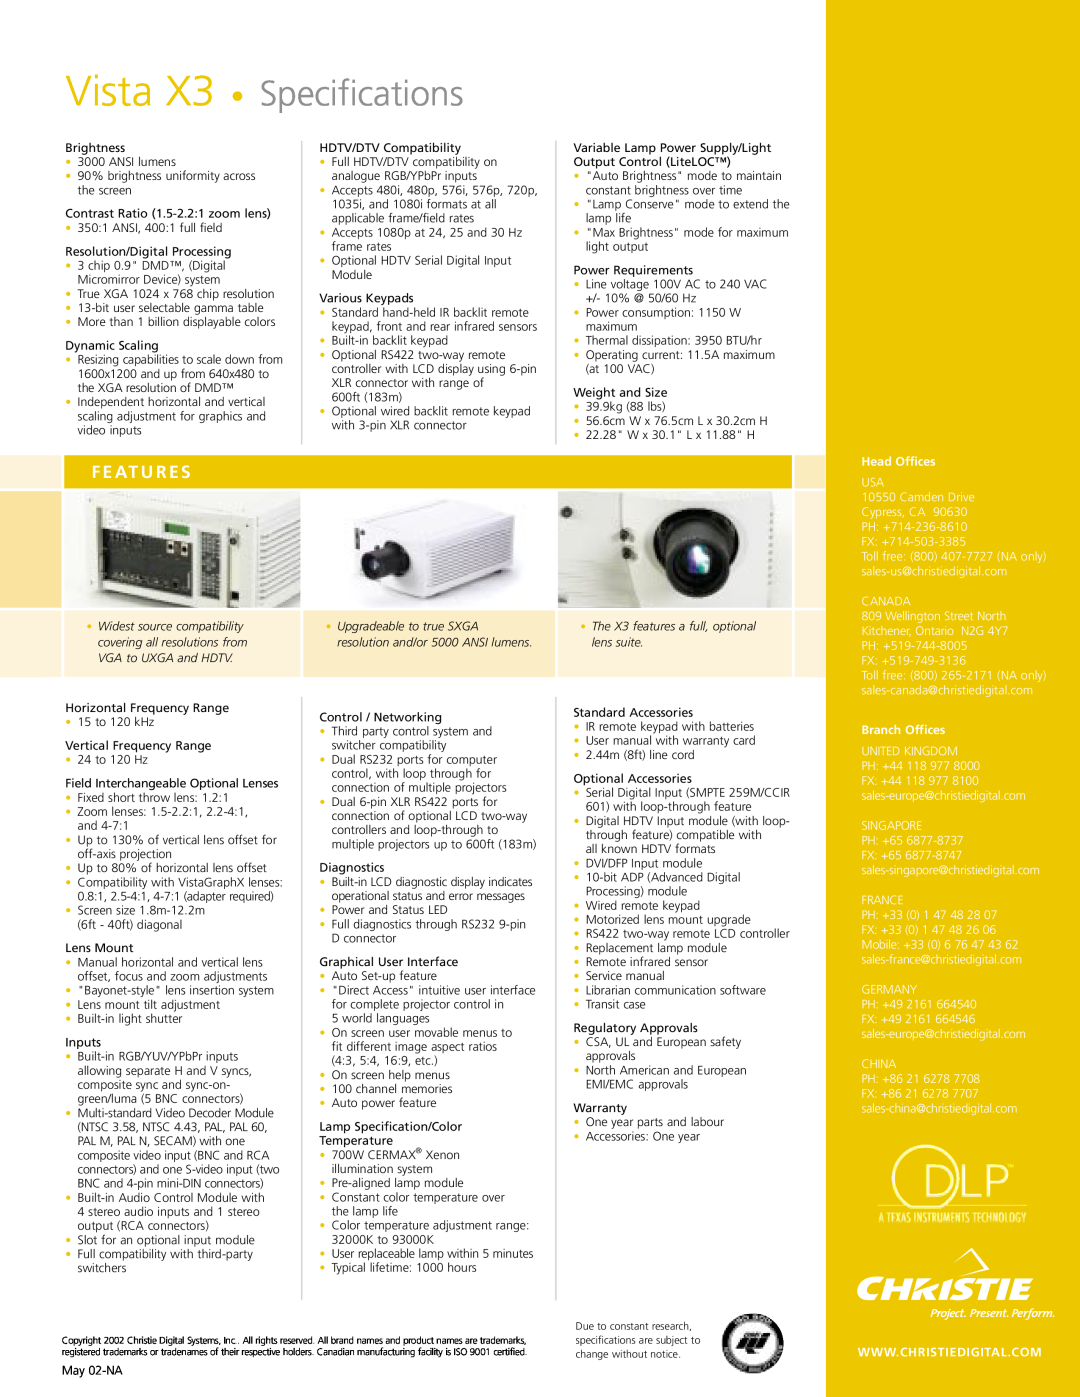 Christie Digital Systems manual F E At U R E S, Vista X3 Specifications, Head Offices, Branch Offices 